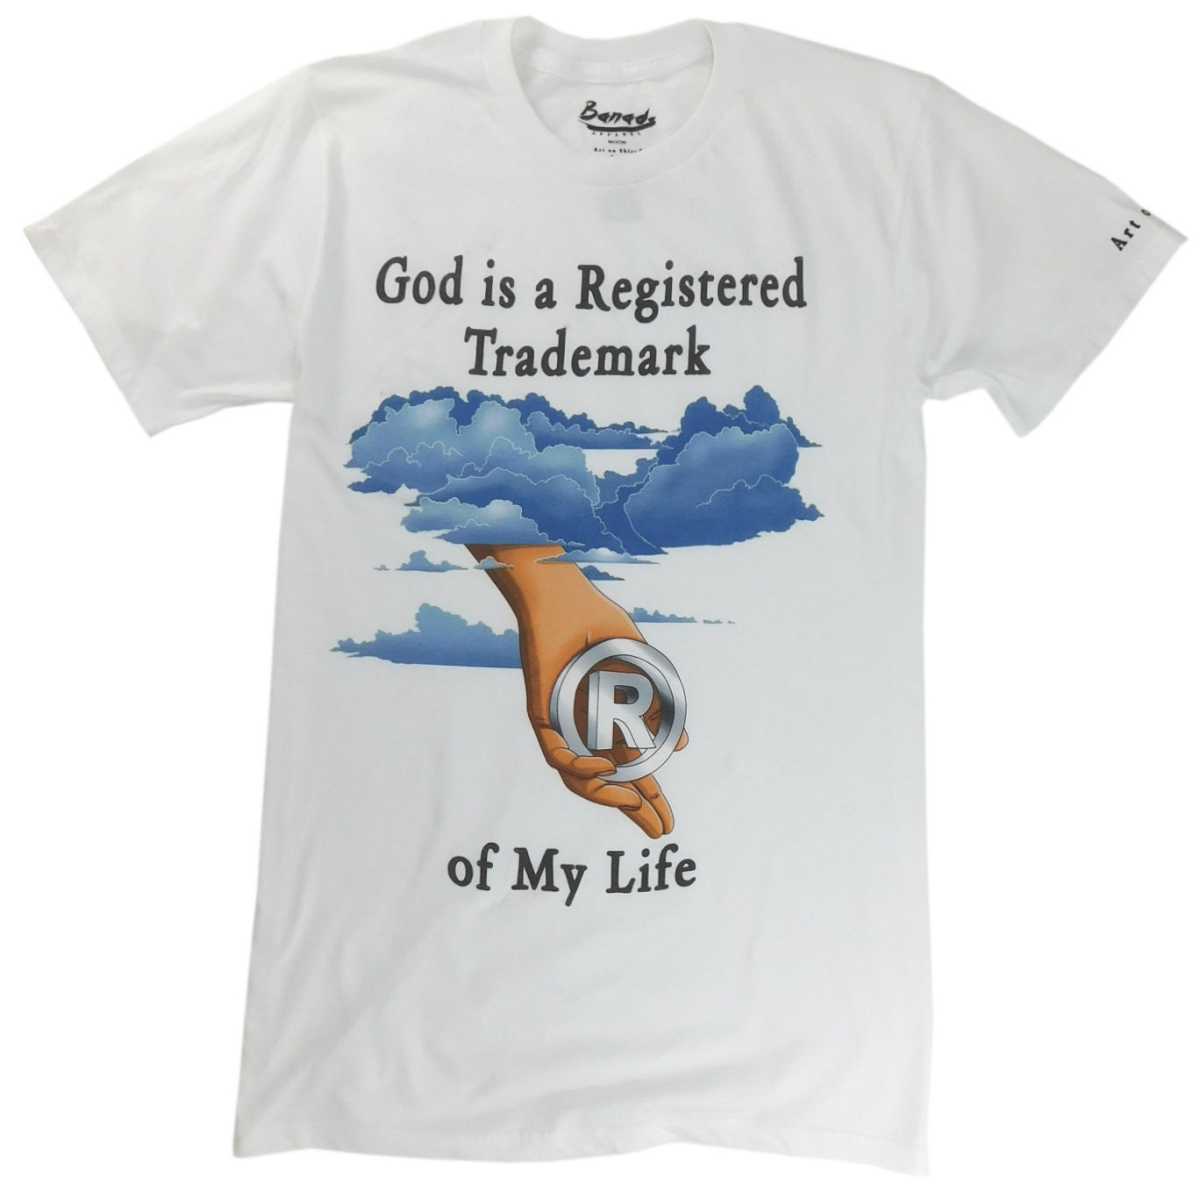 God is a Trademark of My Life - A believer's t-shirt